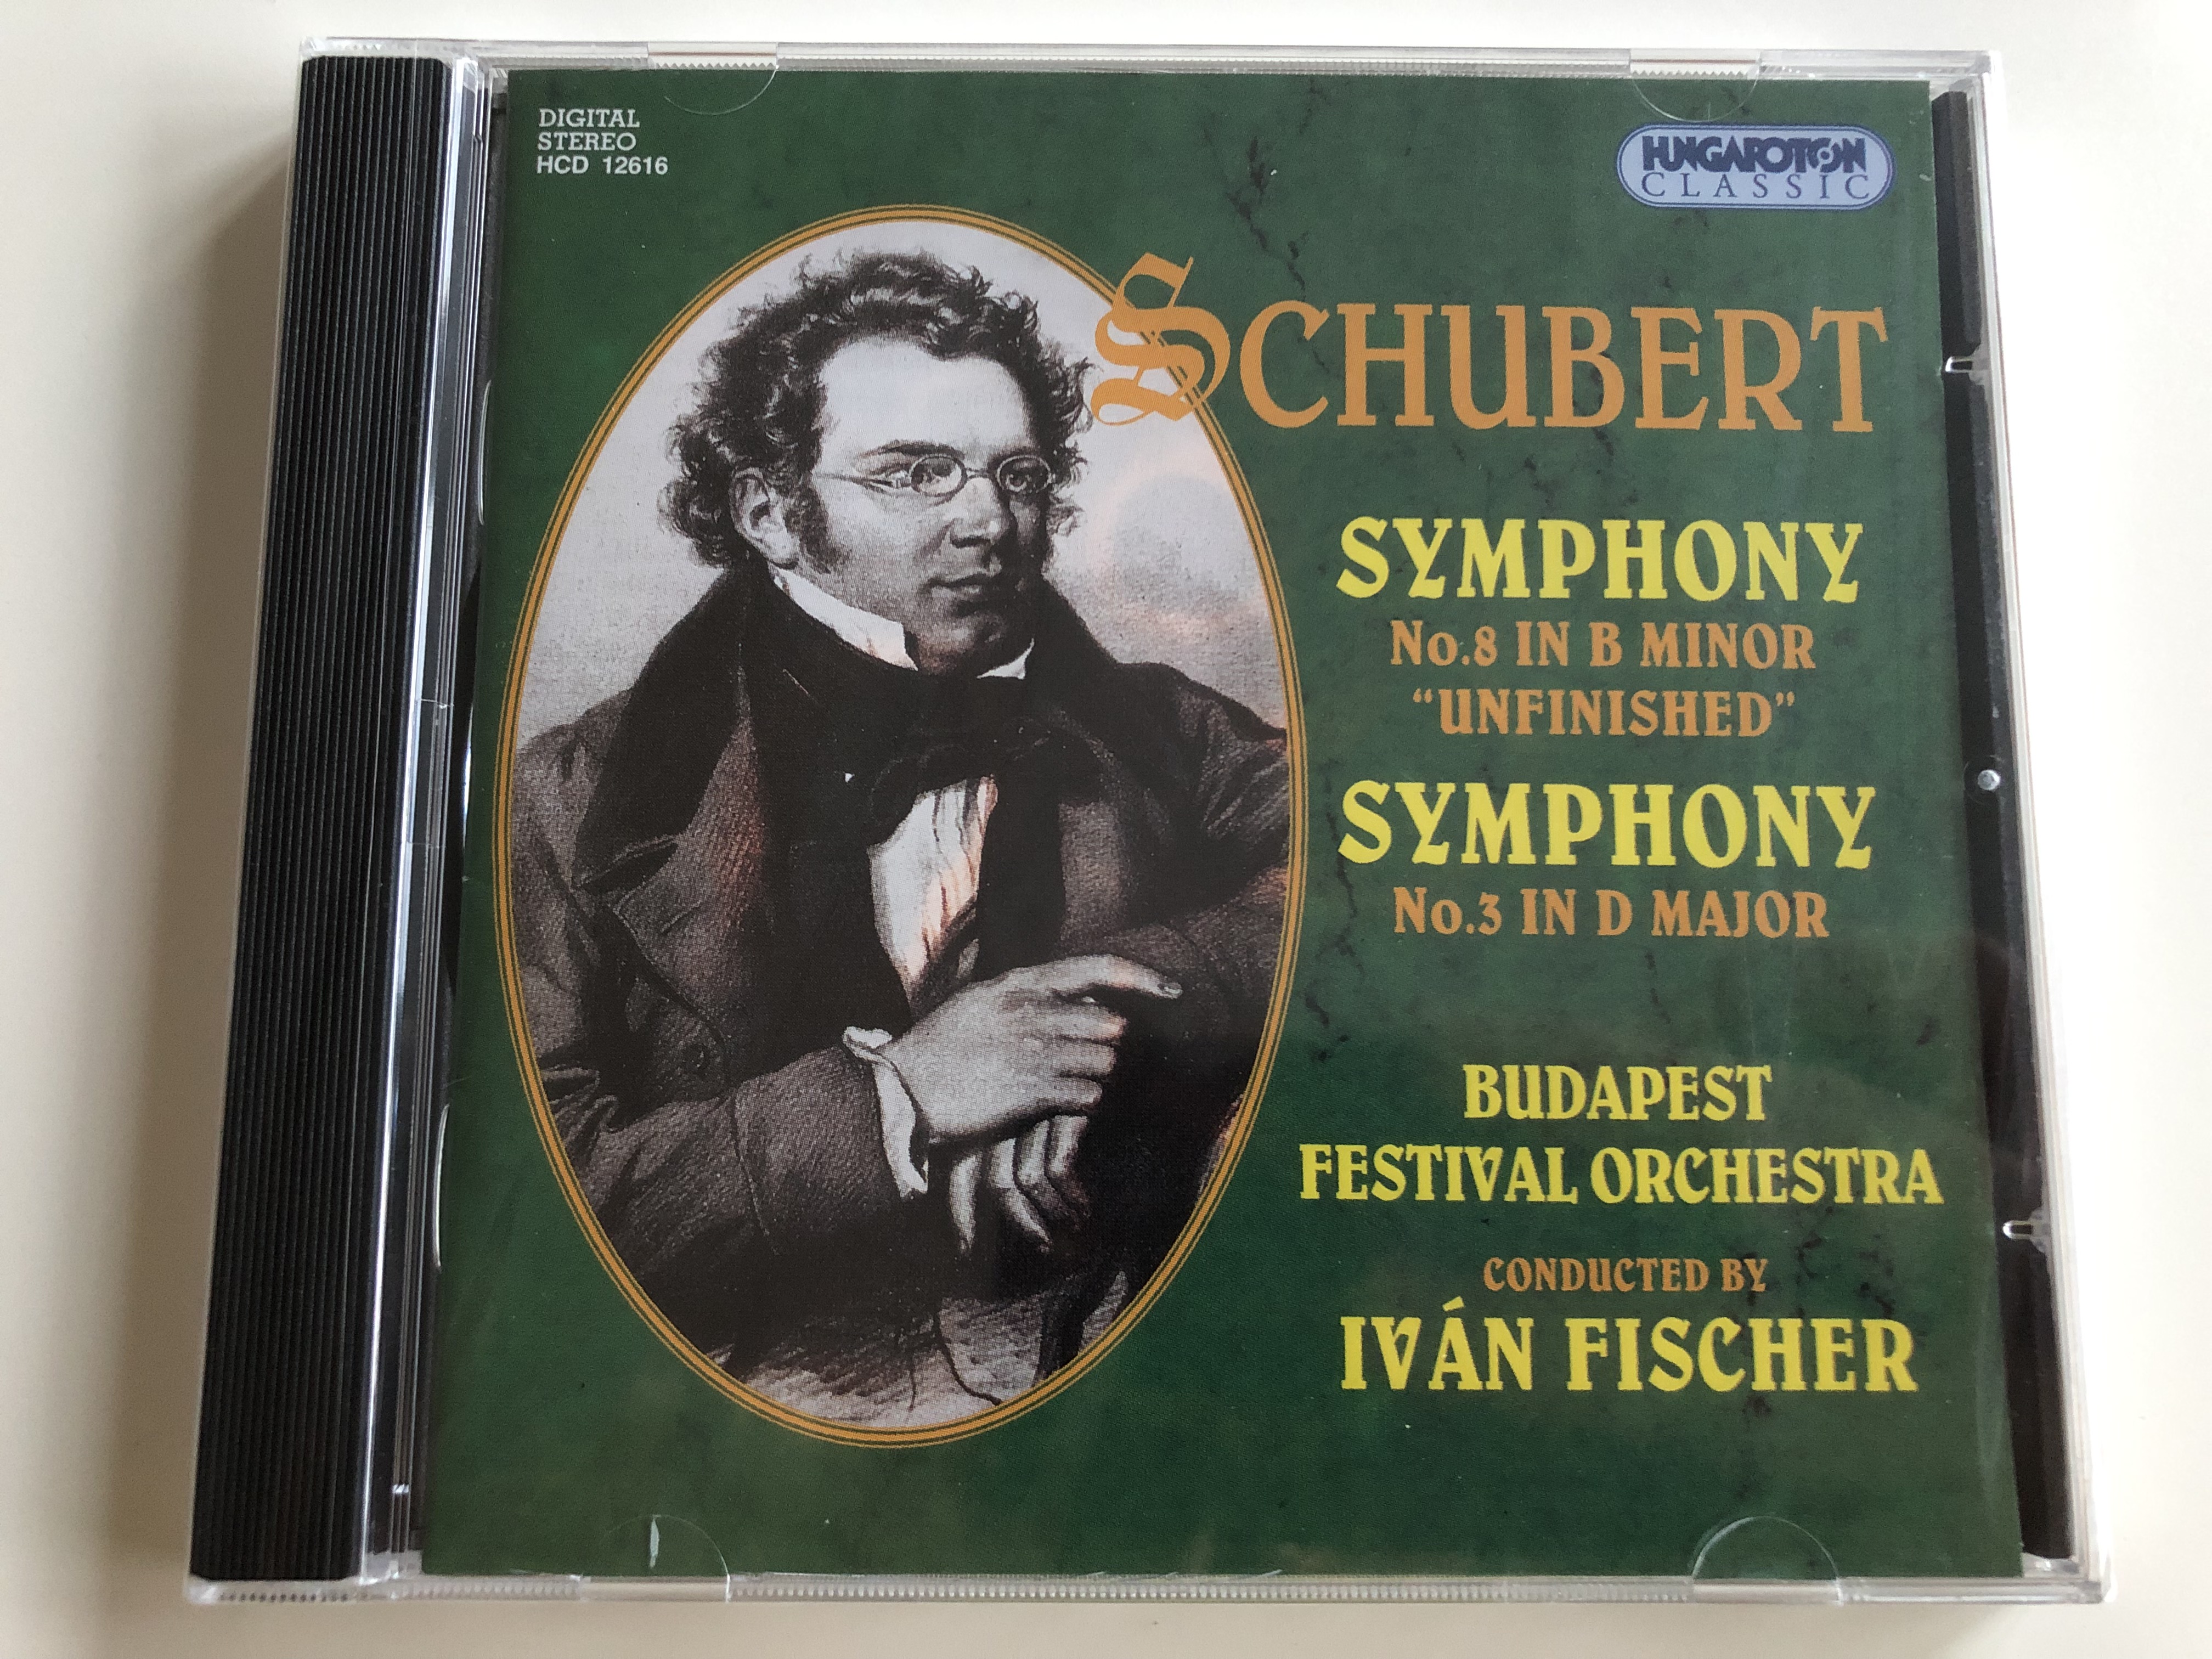 franz-schubert-symphony-no.-8-in-b-minor-unfinished-symphony-no.-3-in-d-major-budapest-festival-orchestra-conducted-by-iv-n-fischer-hungaroton-classic-hcd-12616-1-.jpg